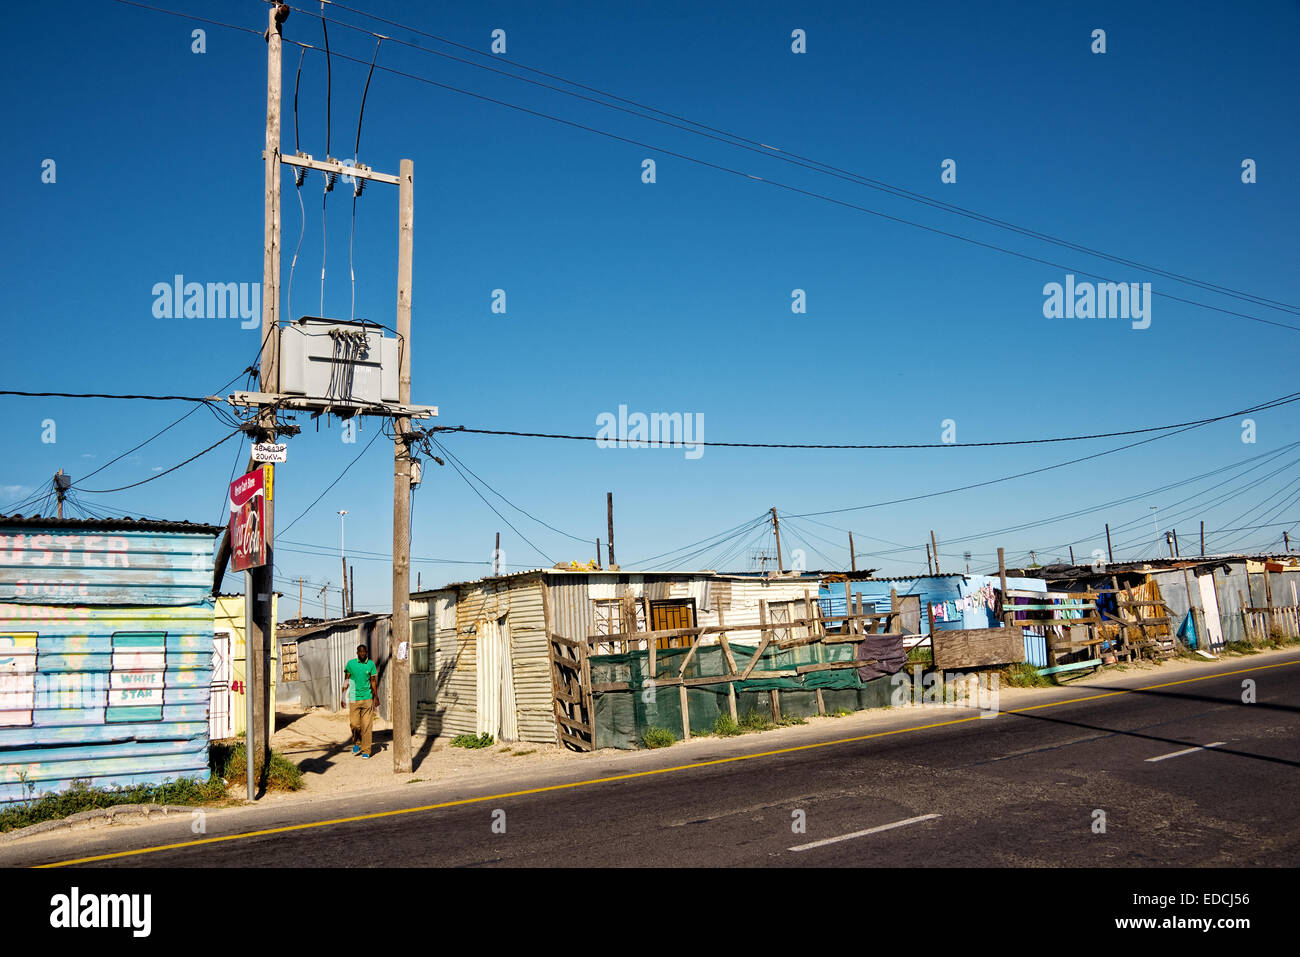 Tin houses in the township of Khayelitsha, reputed to be the largest and fastest growing township in South Africa. Stock Photo